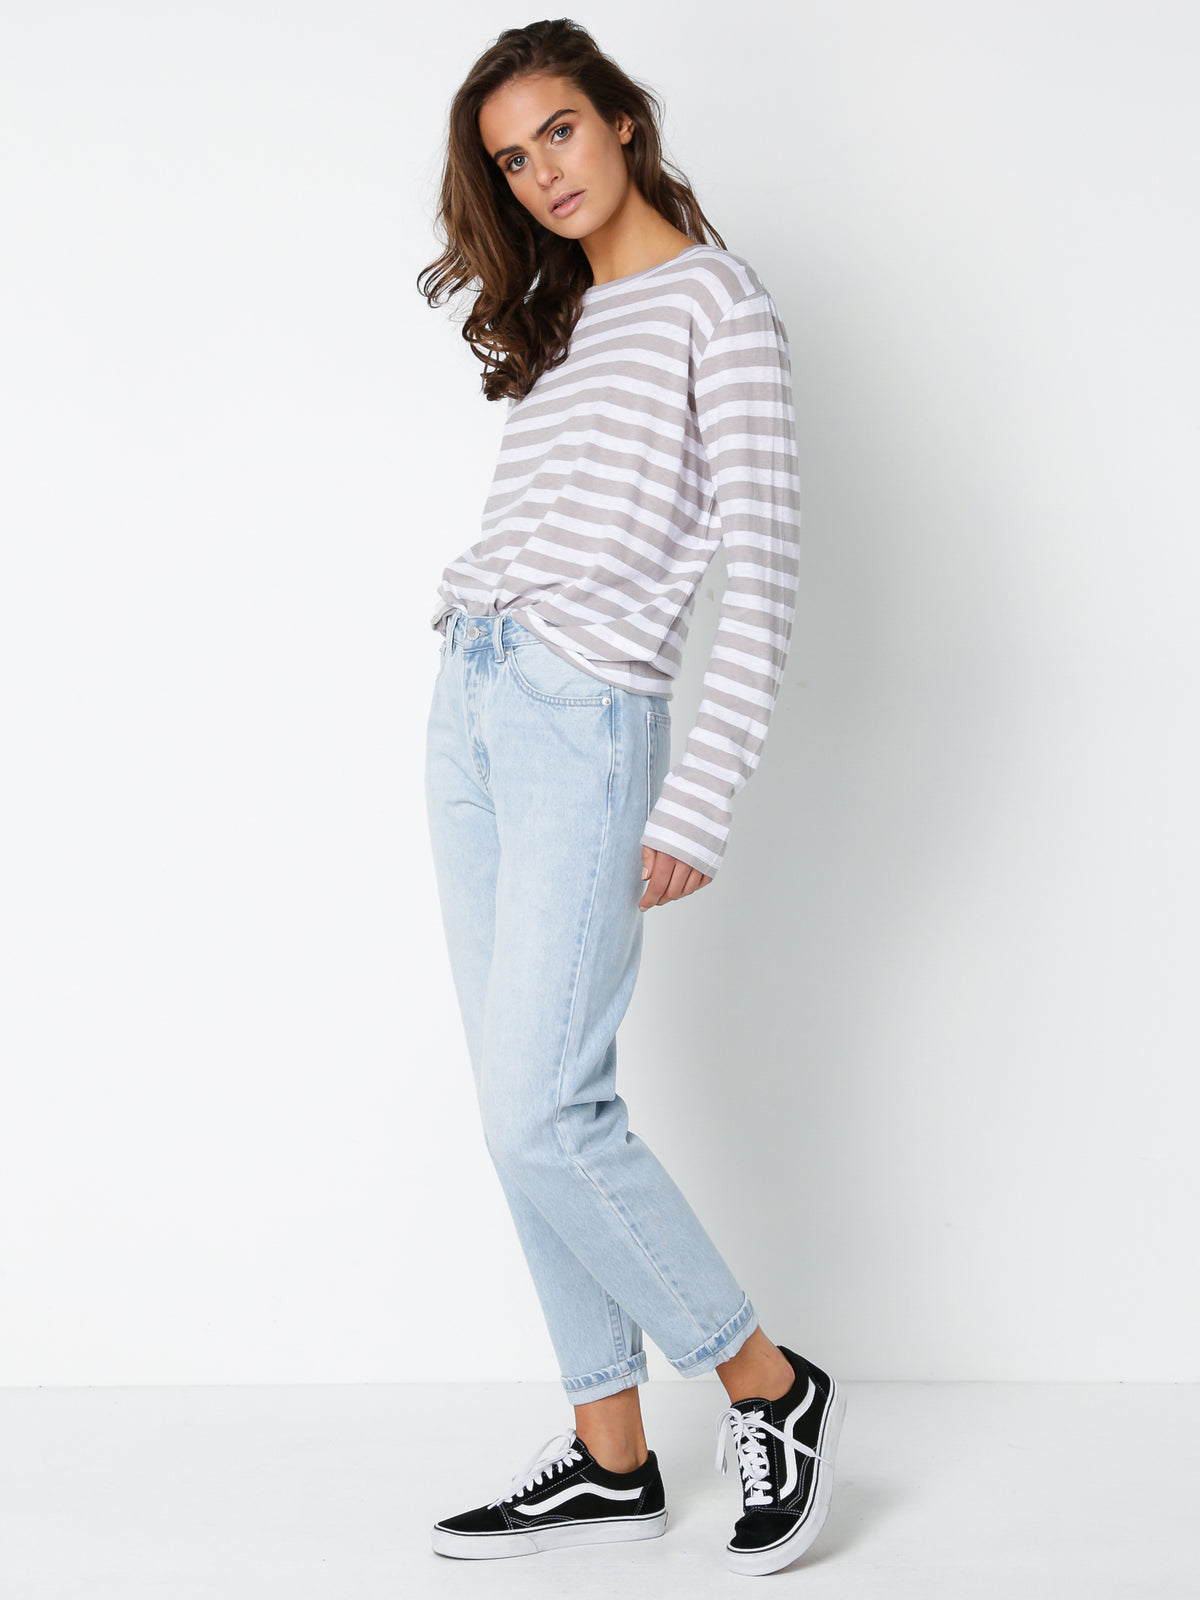 Bay Long Sleeve T-Shirt in White and Grey Stripe